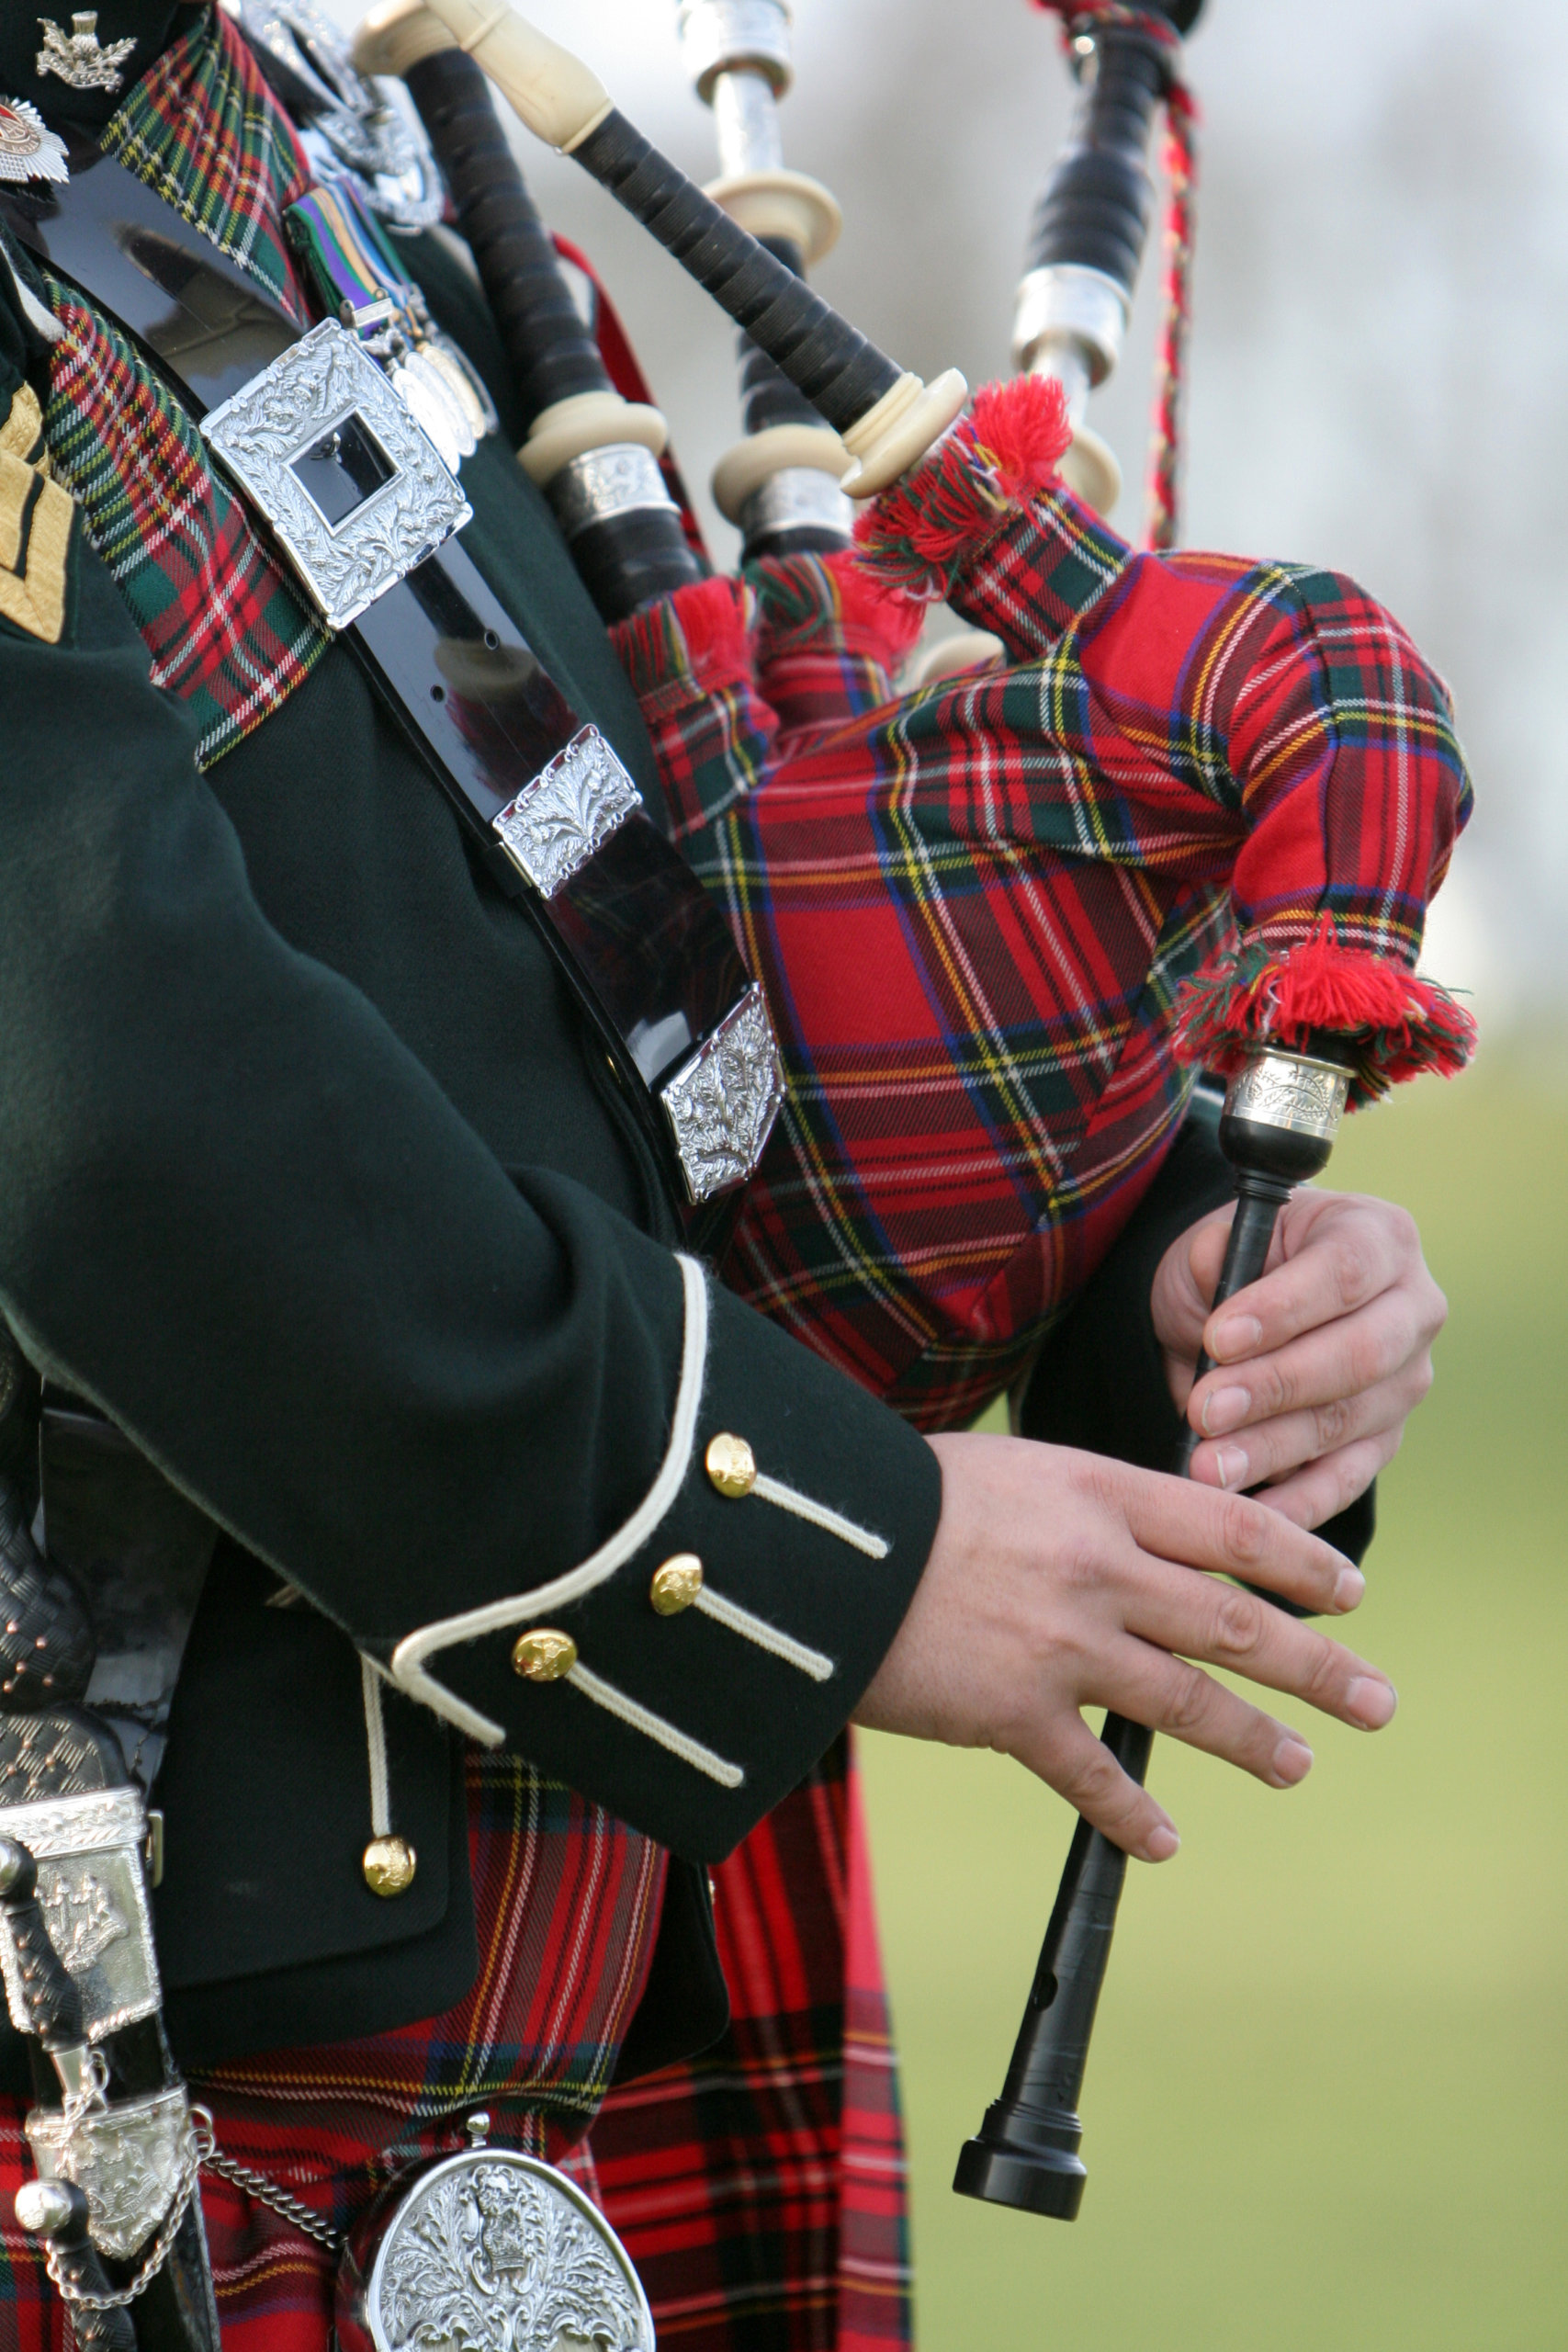 Get a lesson in bagpipes and all things Celtic at a fascination virtual, North Fork-based event